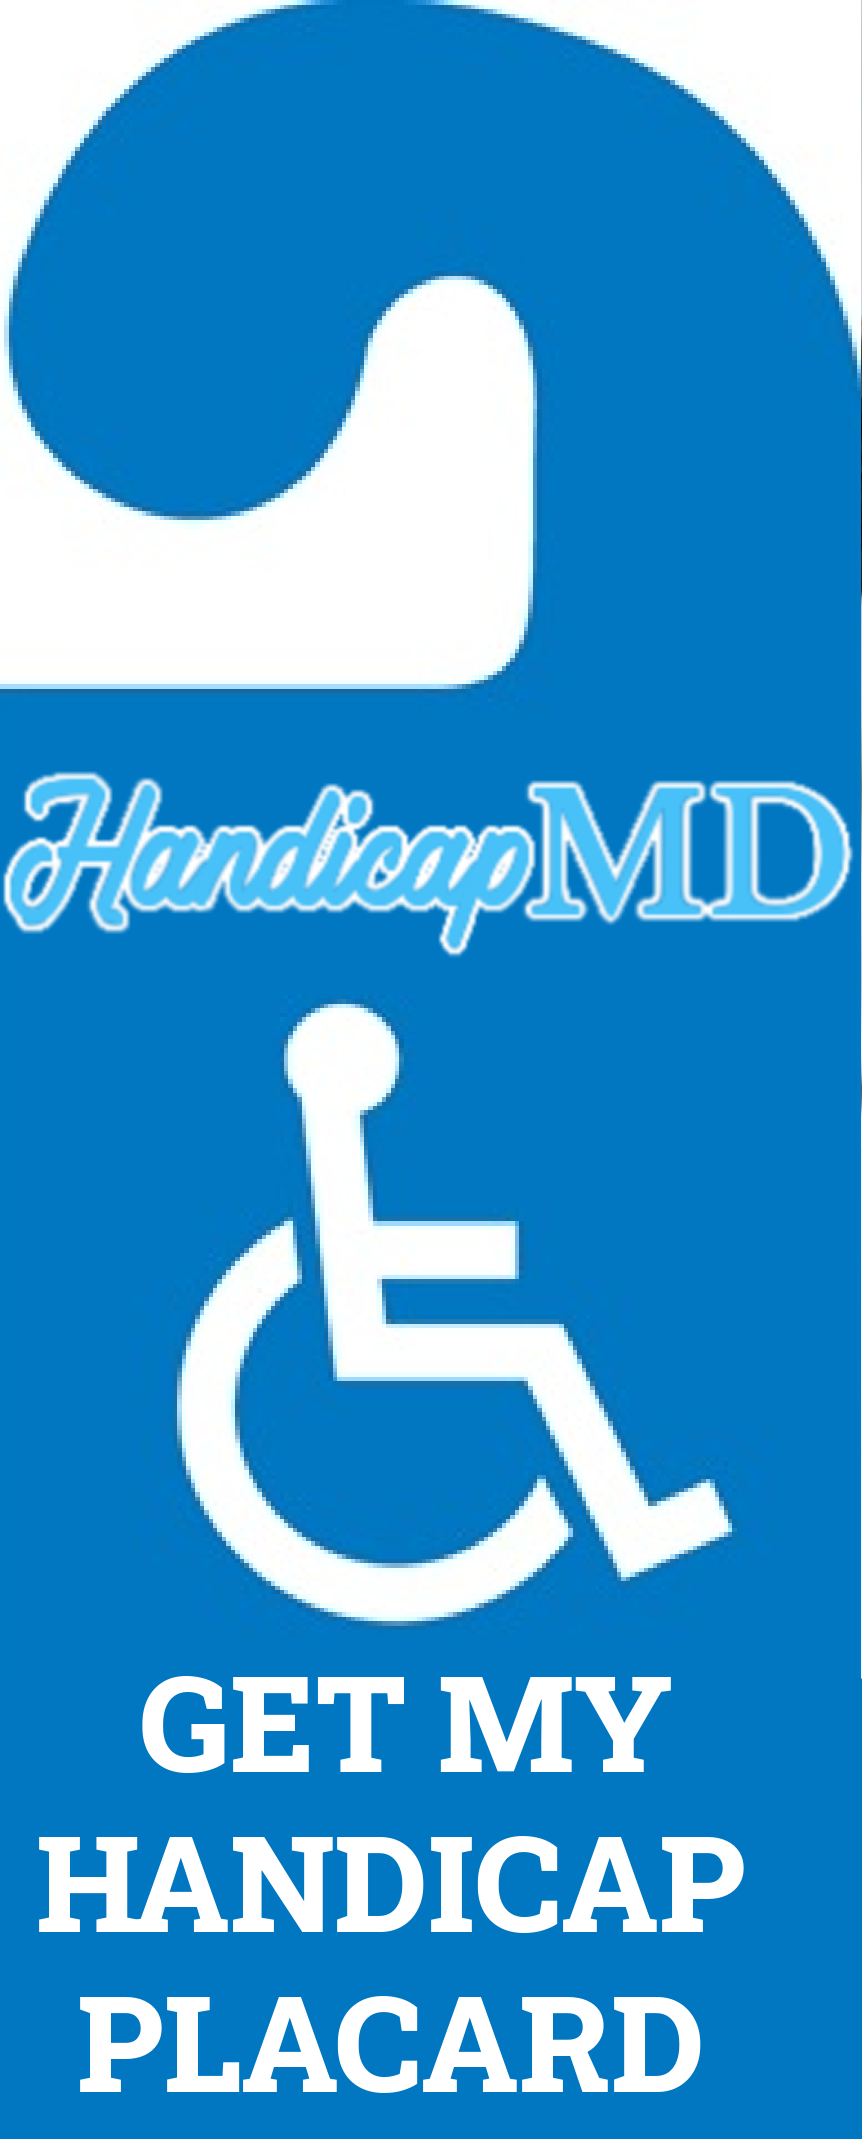 Online Guide to Disabled Parking in South Carolina